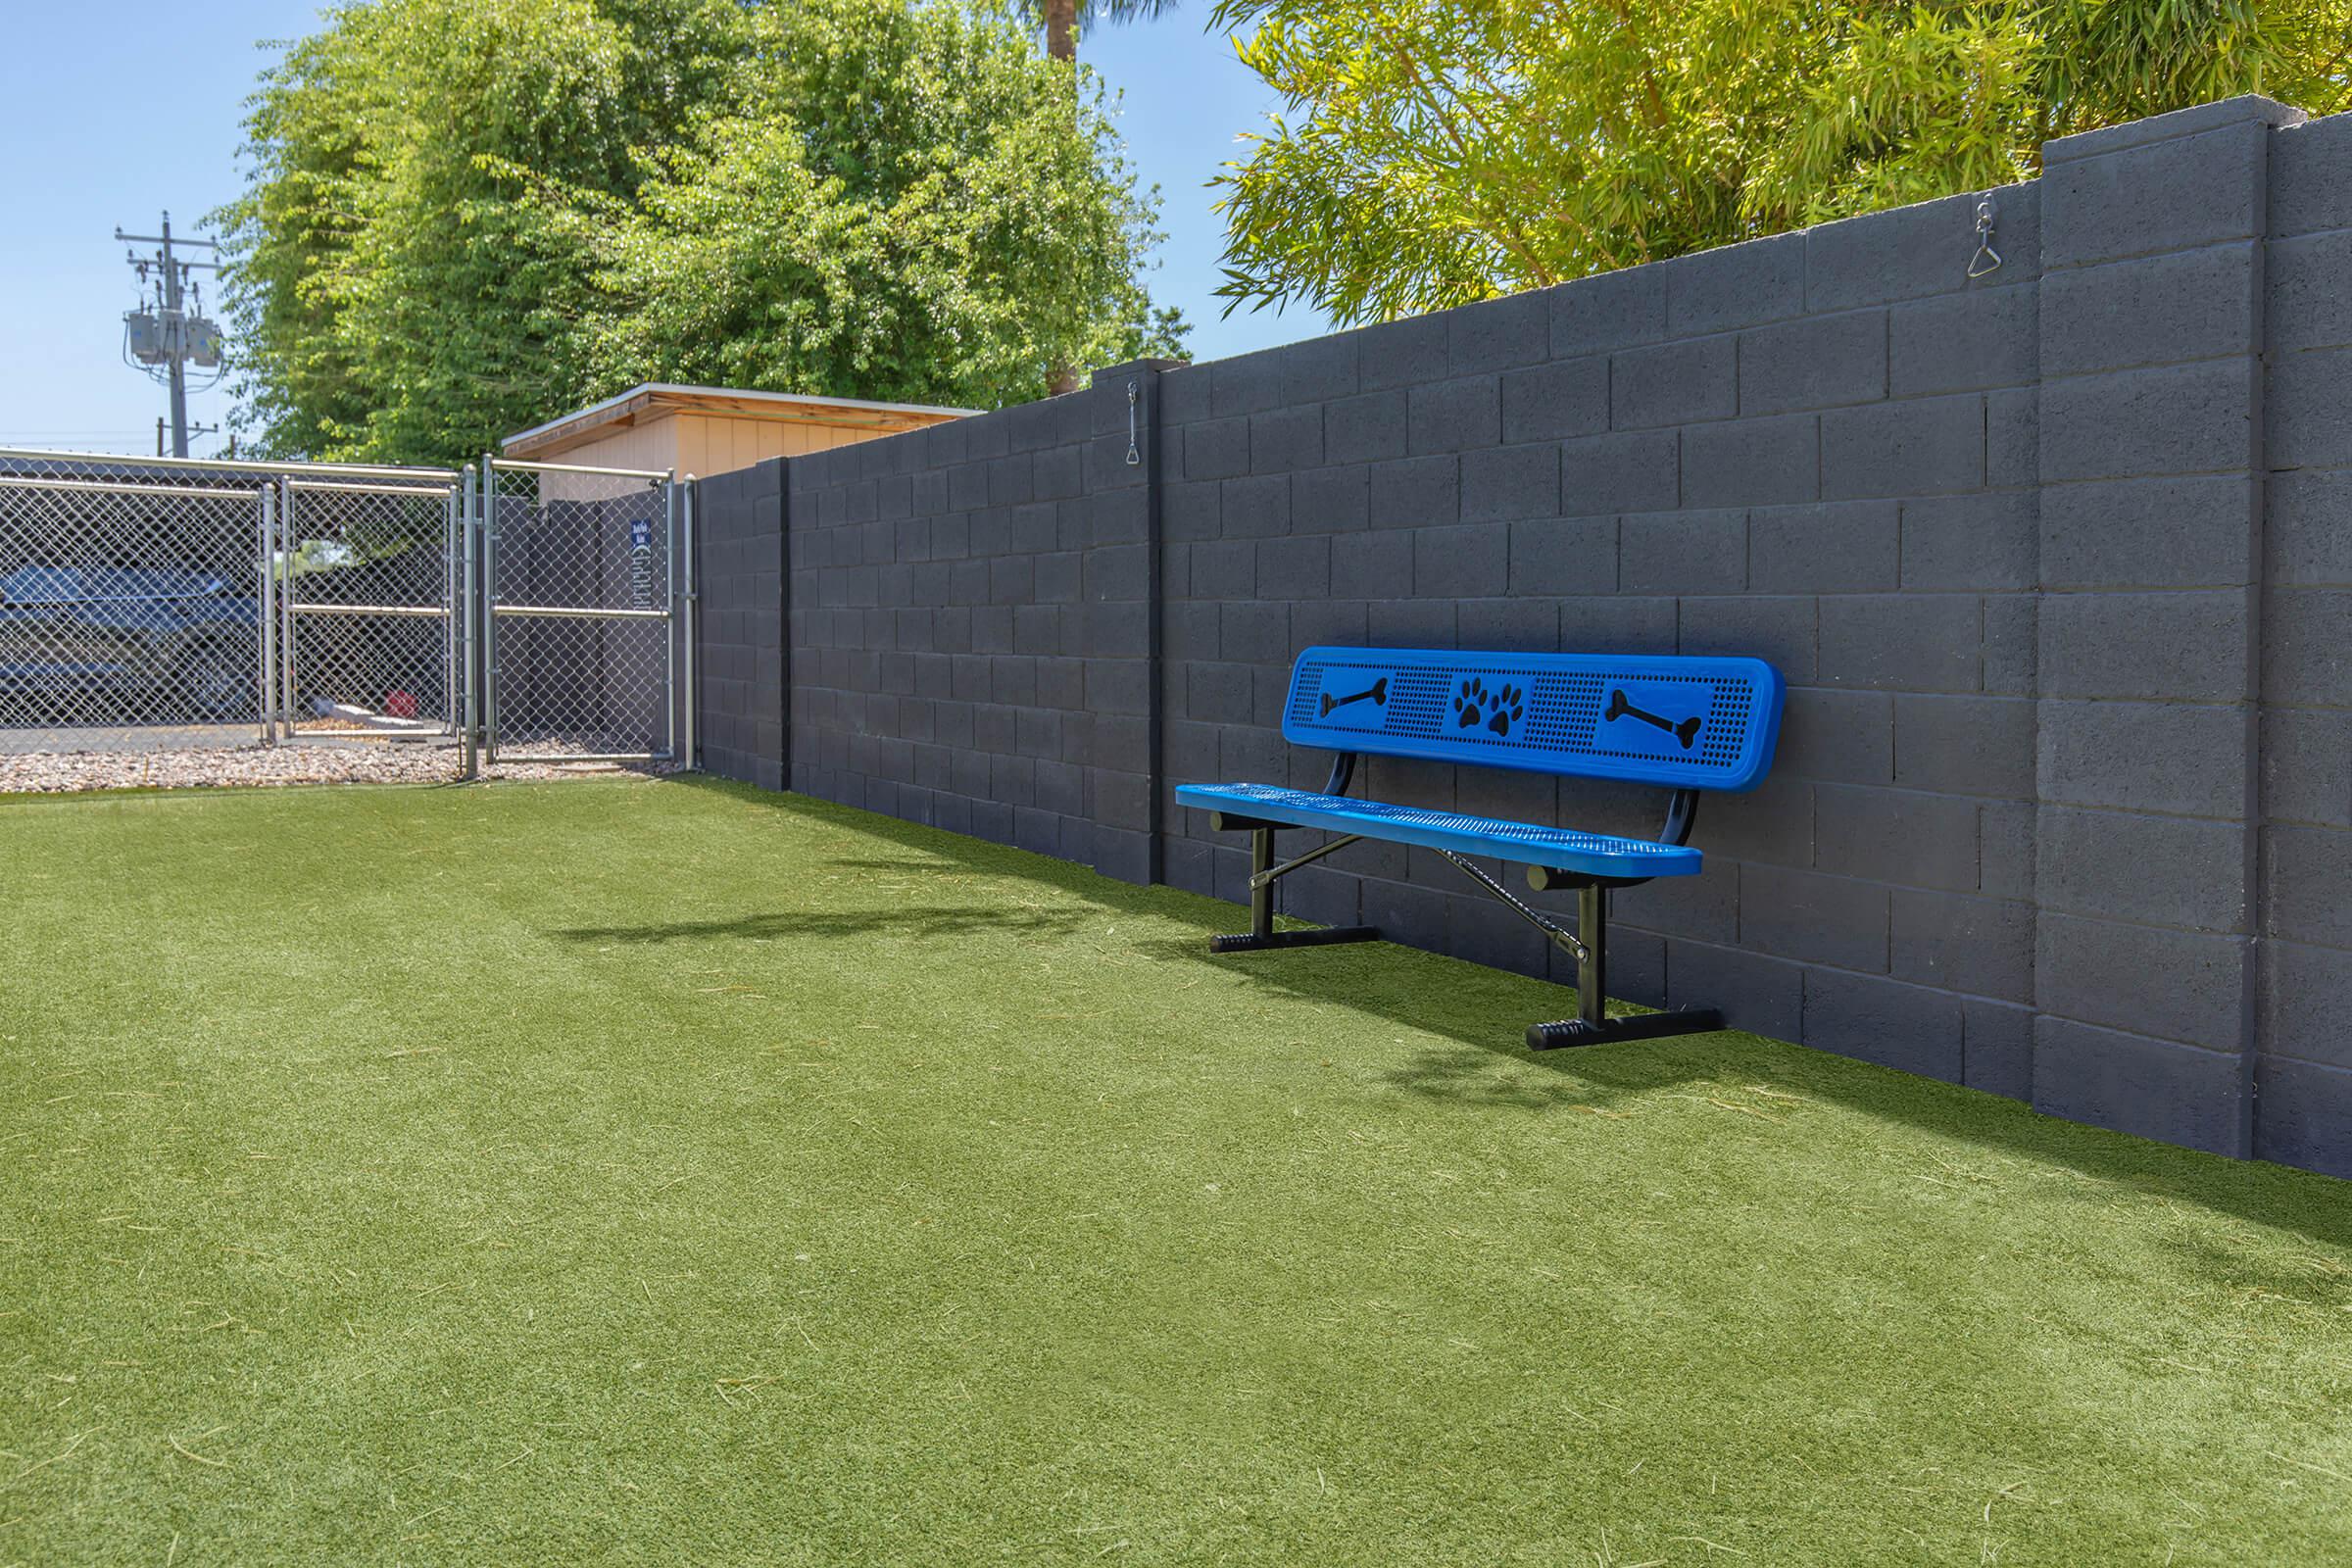 Grass dog park area with blue bench at Rise Biltmore apartments in Phoenix